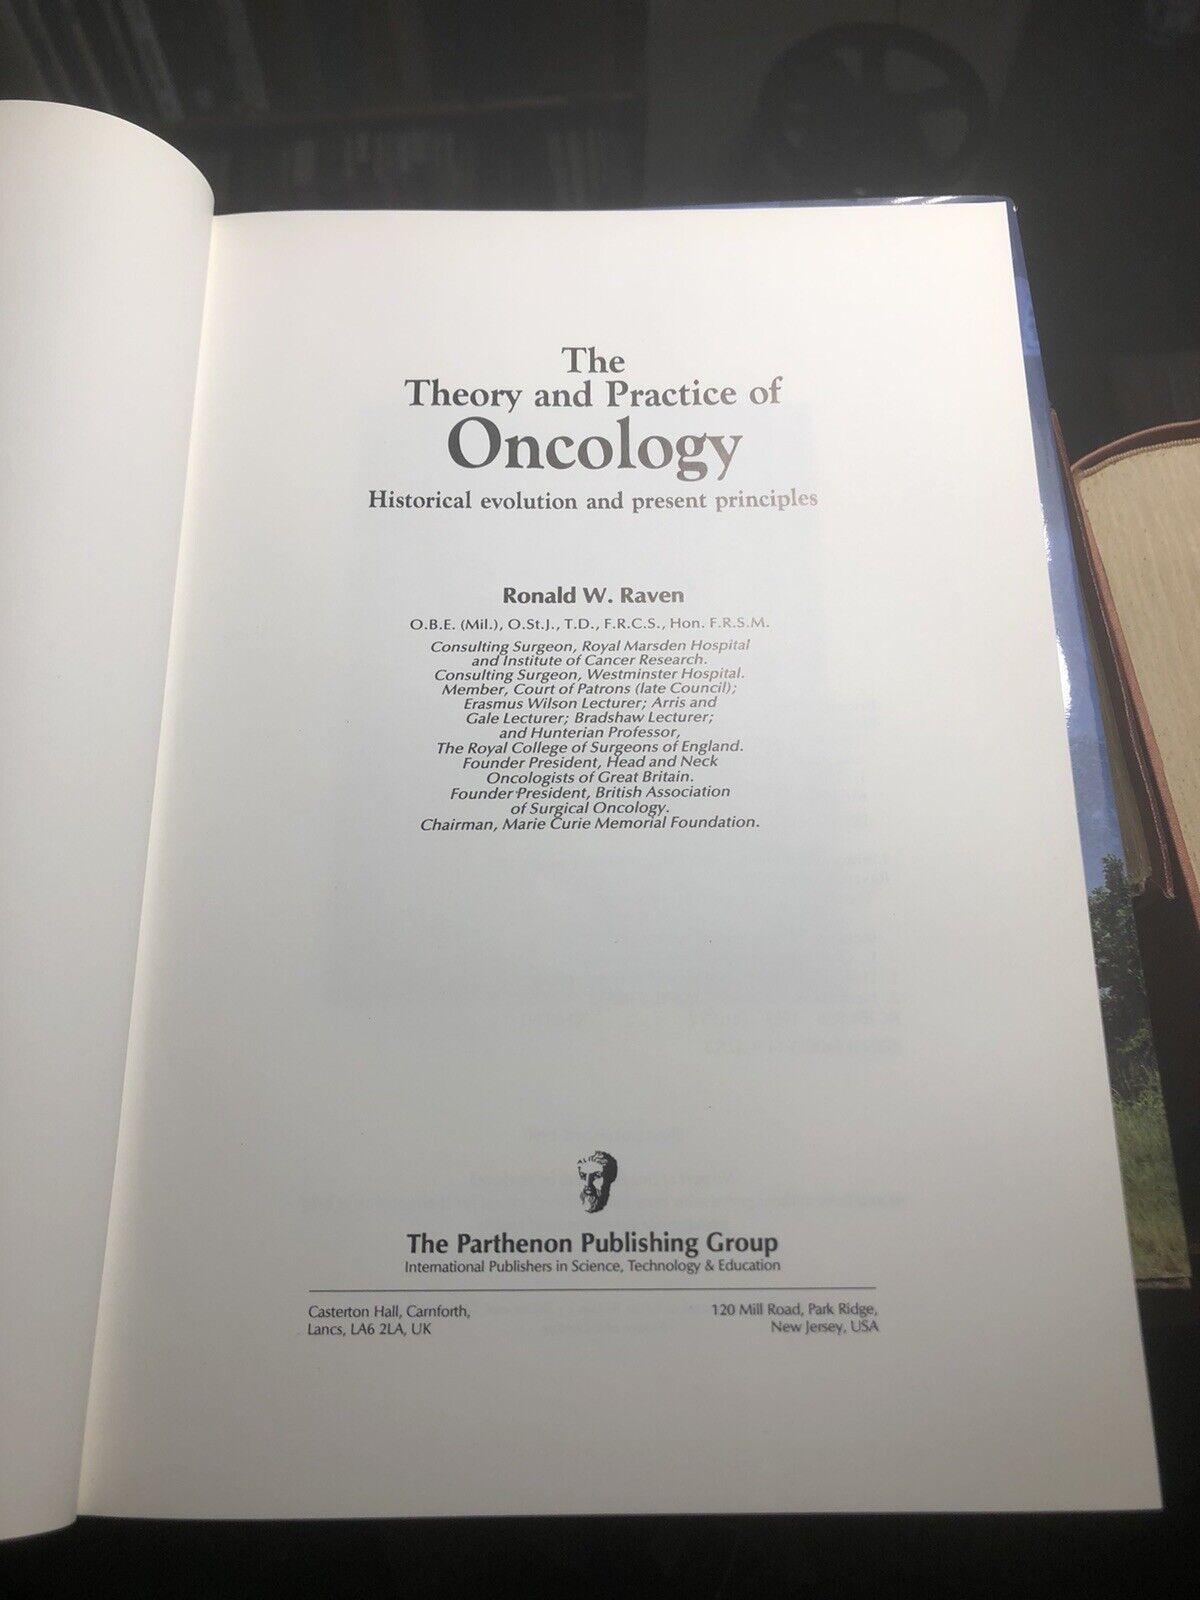 The Theory and Practice of Oncology : Ronald W Raven : Medicine : Historical